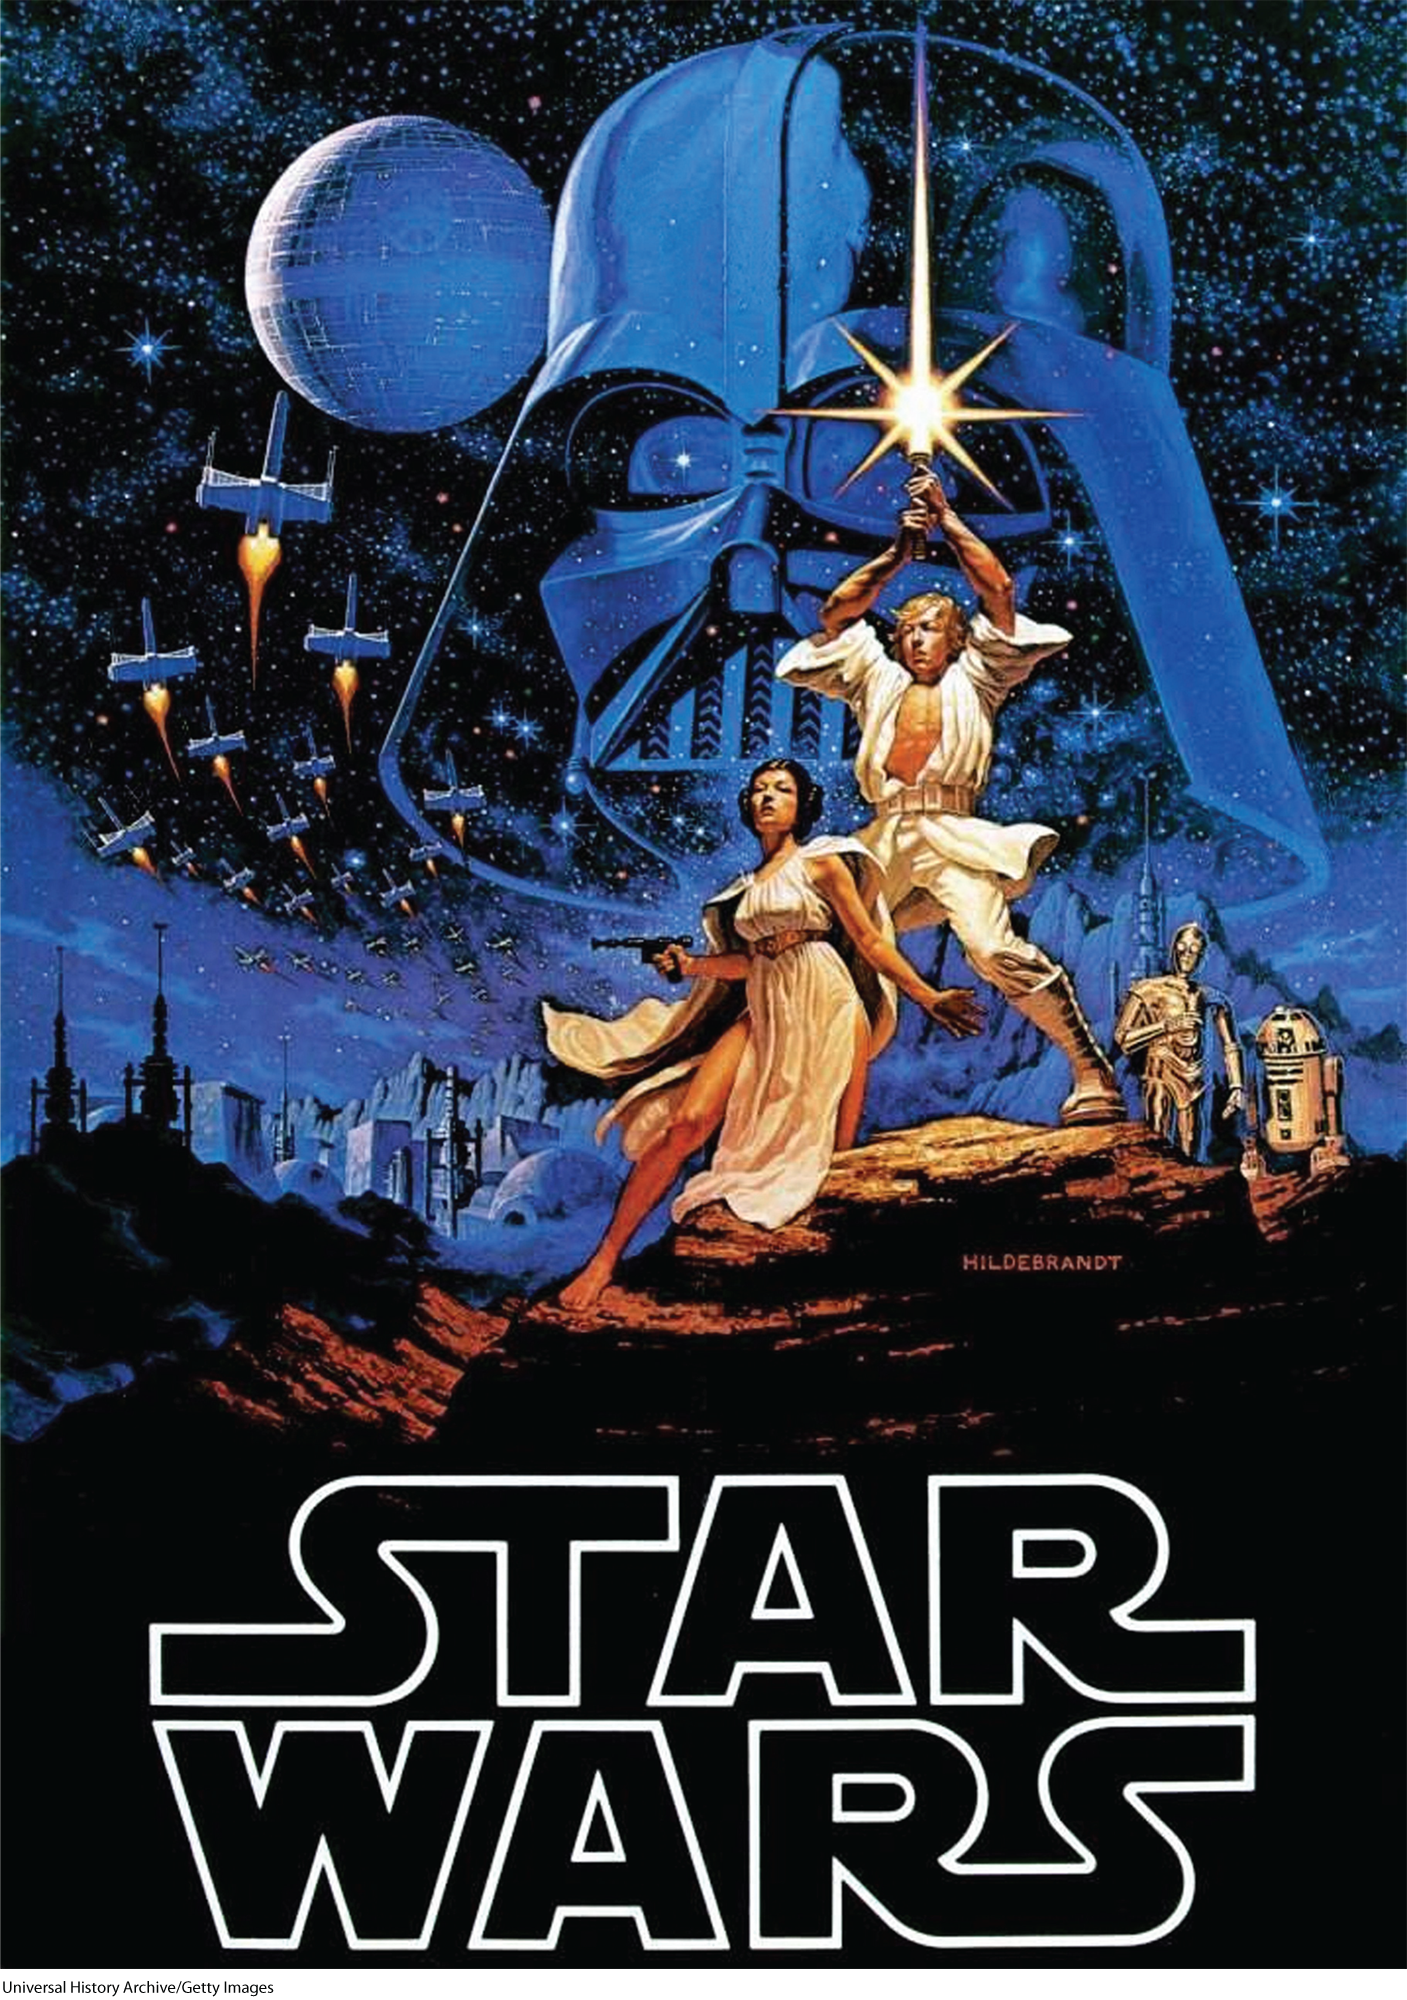 A movie poster is shown. The poster of the movie “STAR WARS” is shown, the poster displays illustrations of the characters in the movie.